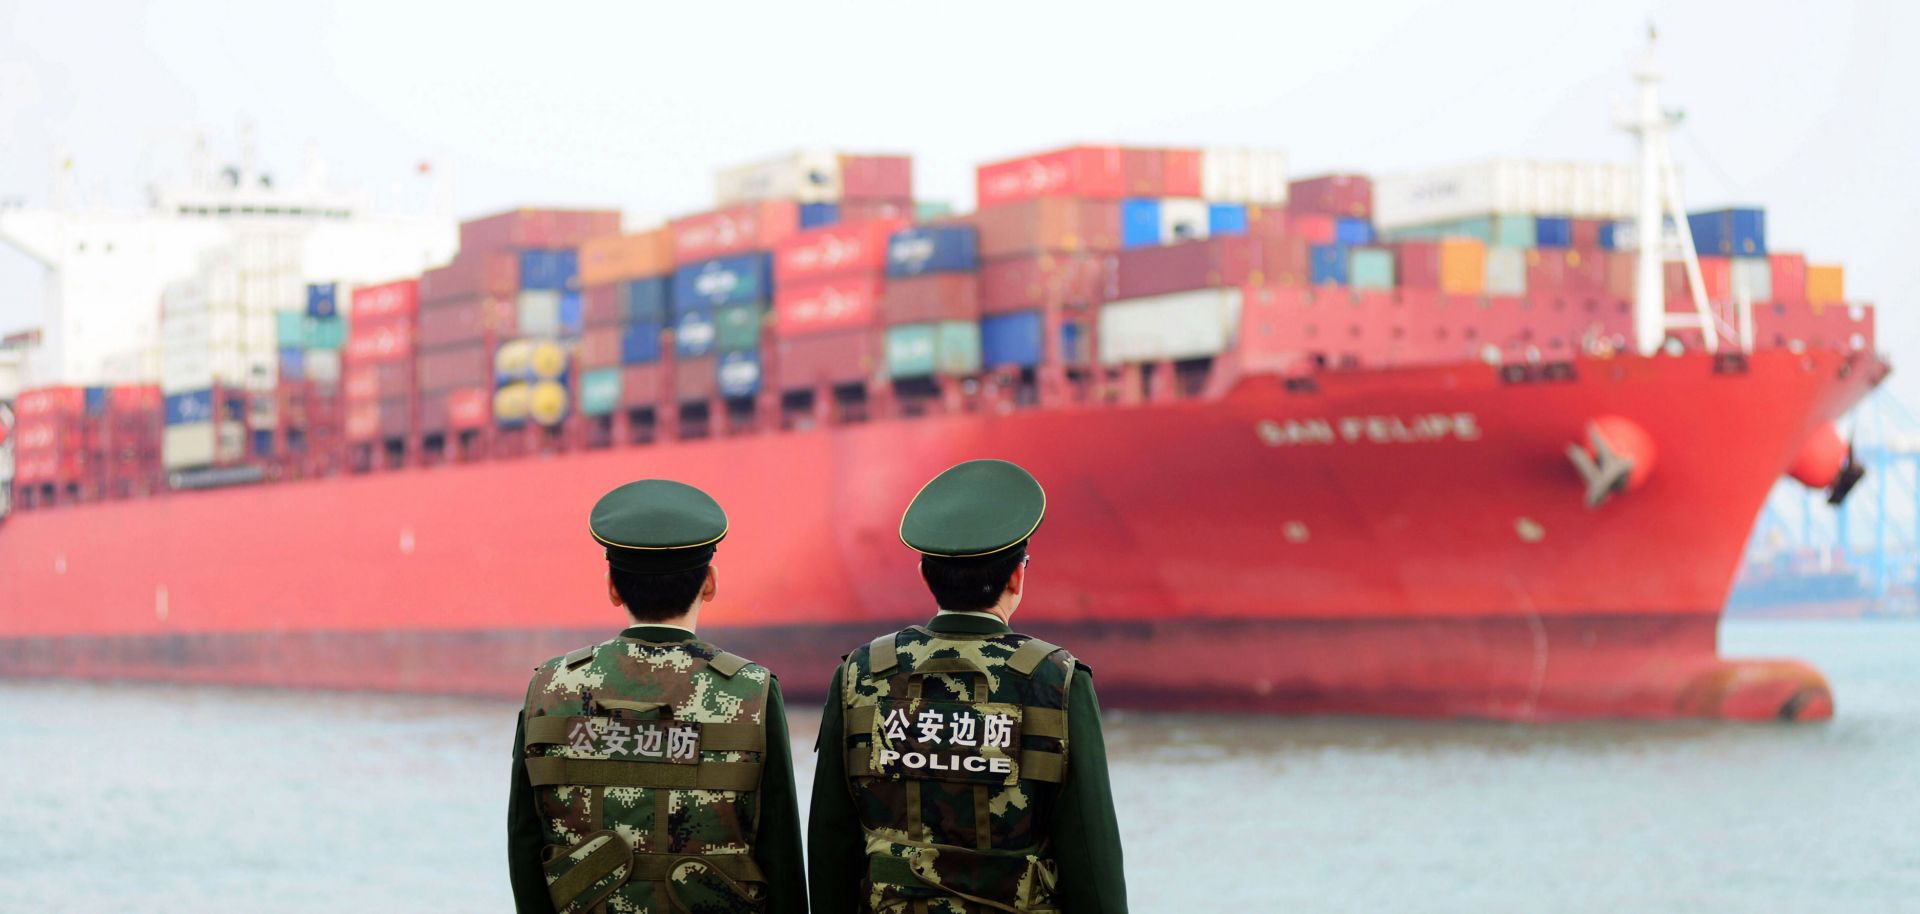 Chinese police officers watch a cargo ship in Qingdao, a seaport in Shandong province, on March 8, 2018.